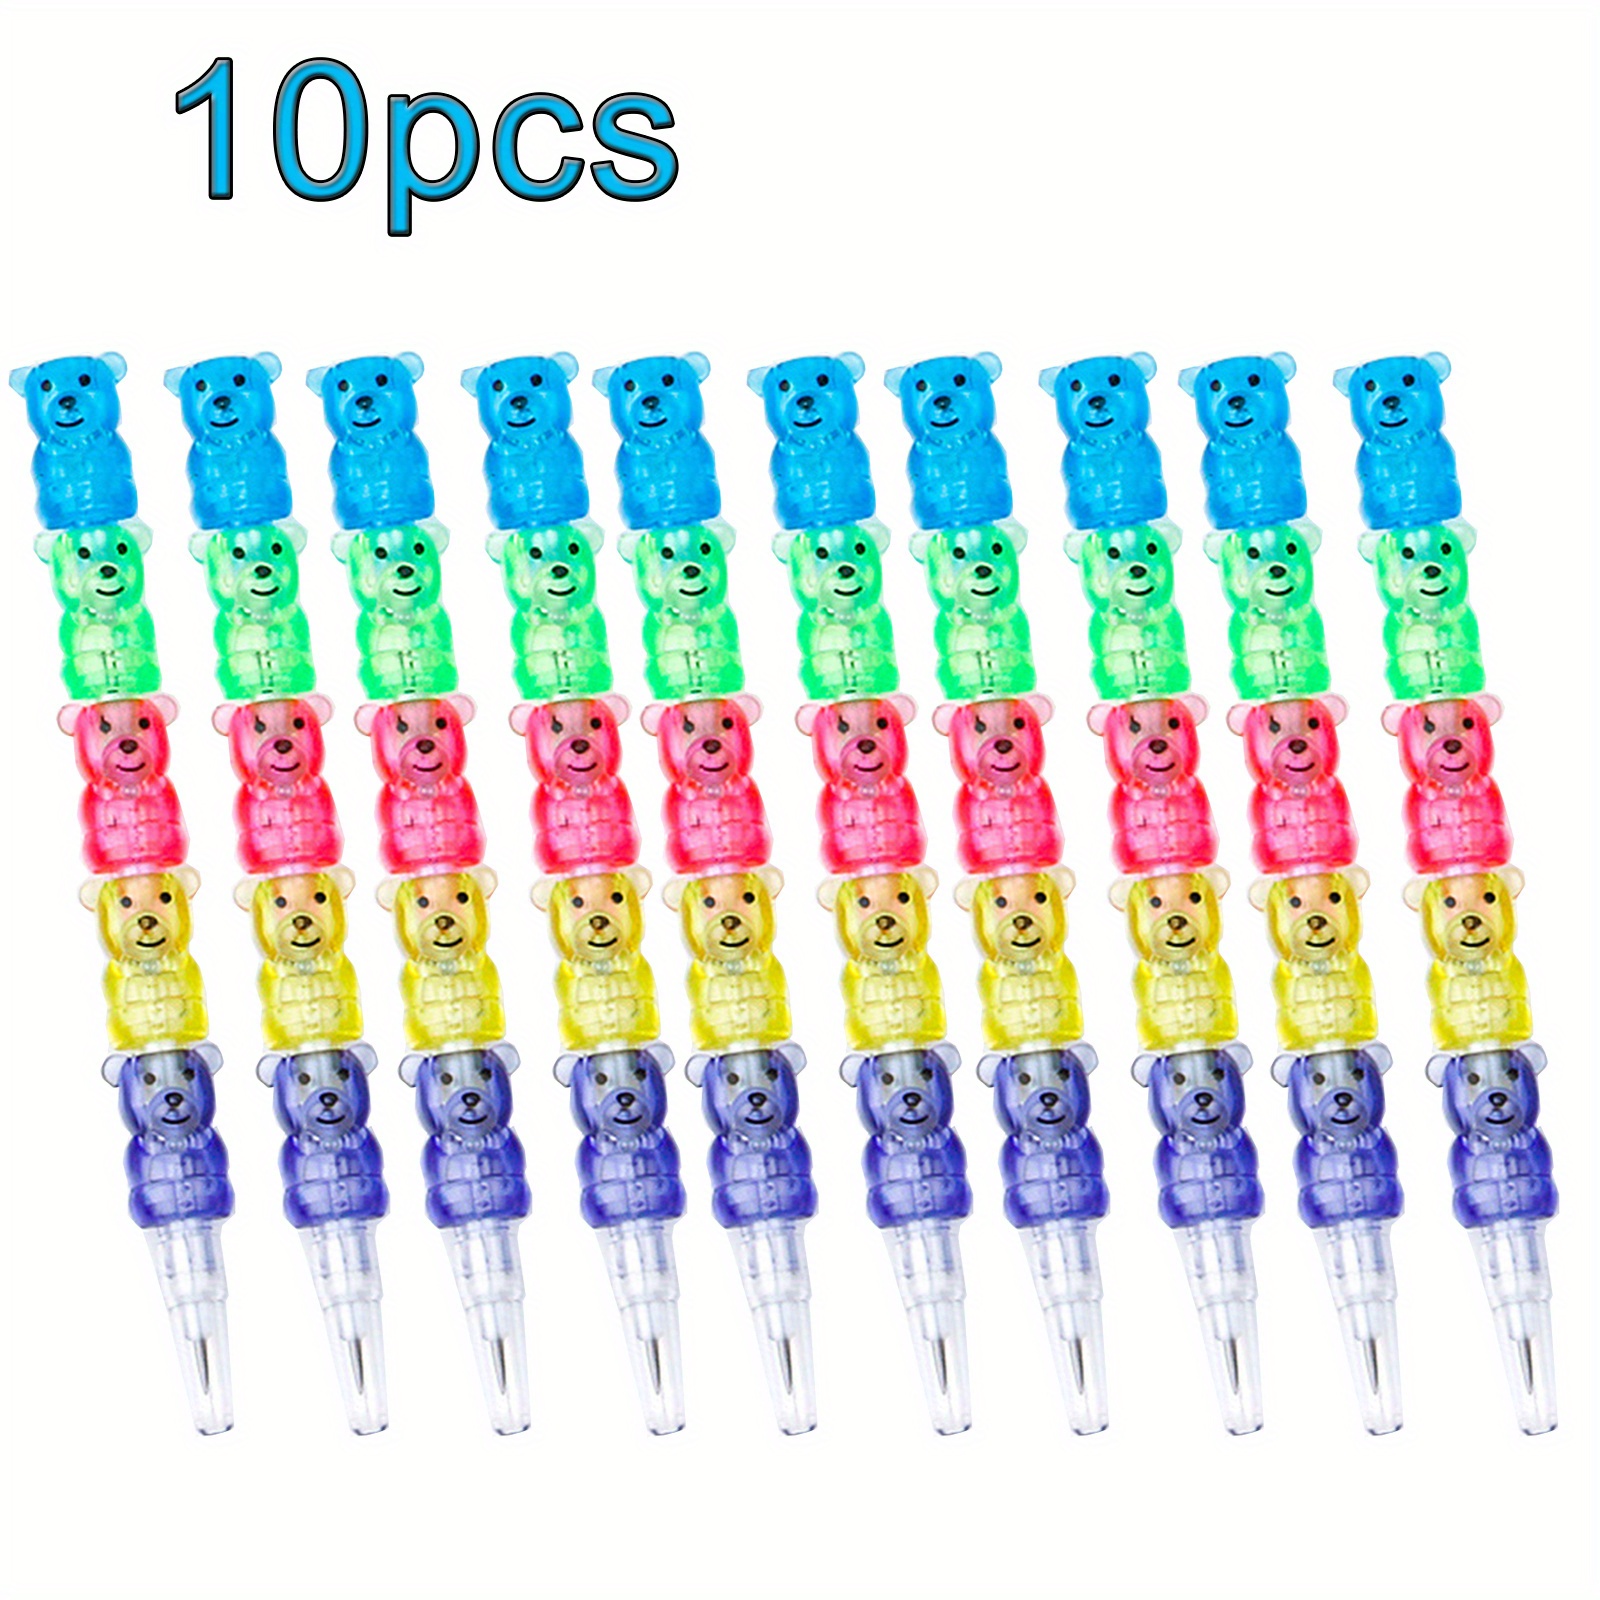 10pcs cool pencils for kids Stackable Pencils Kids Bear Shaped Stacking